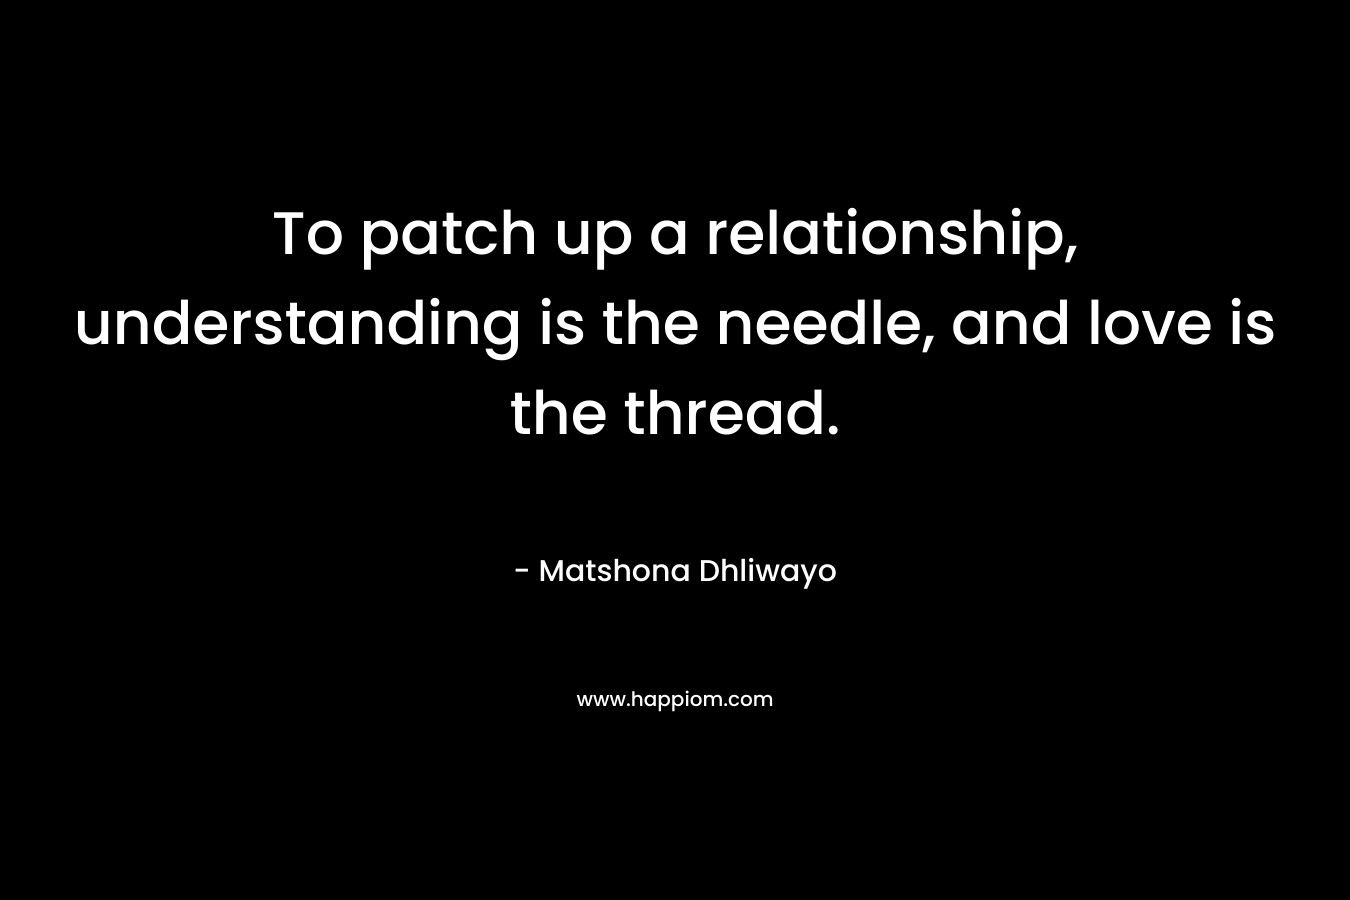 To patch up a relationship, understanding is the needle, and love is the thread.